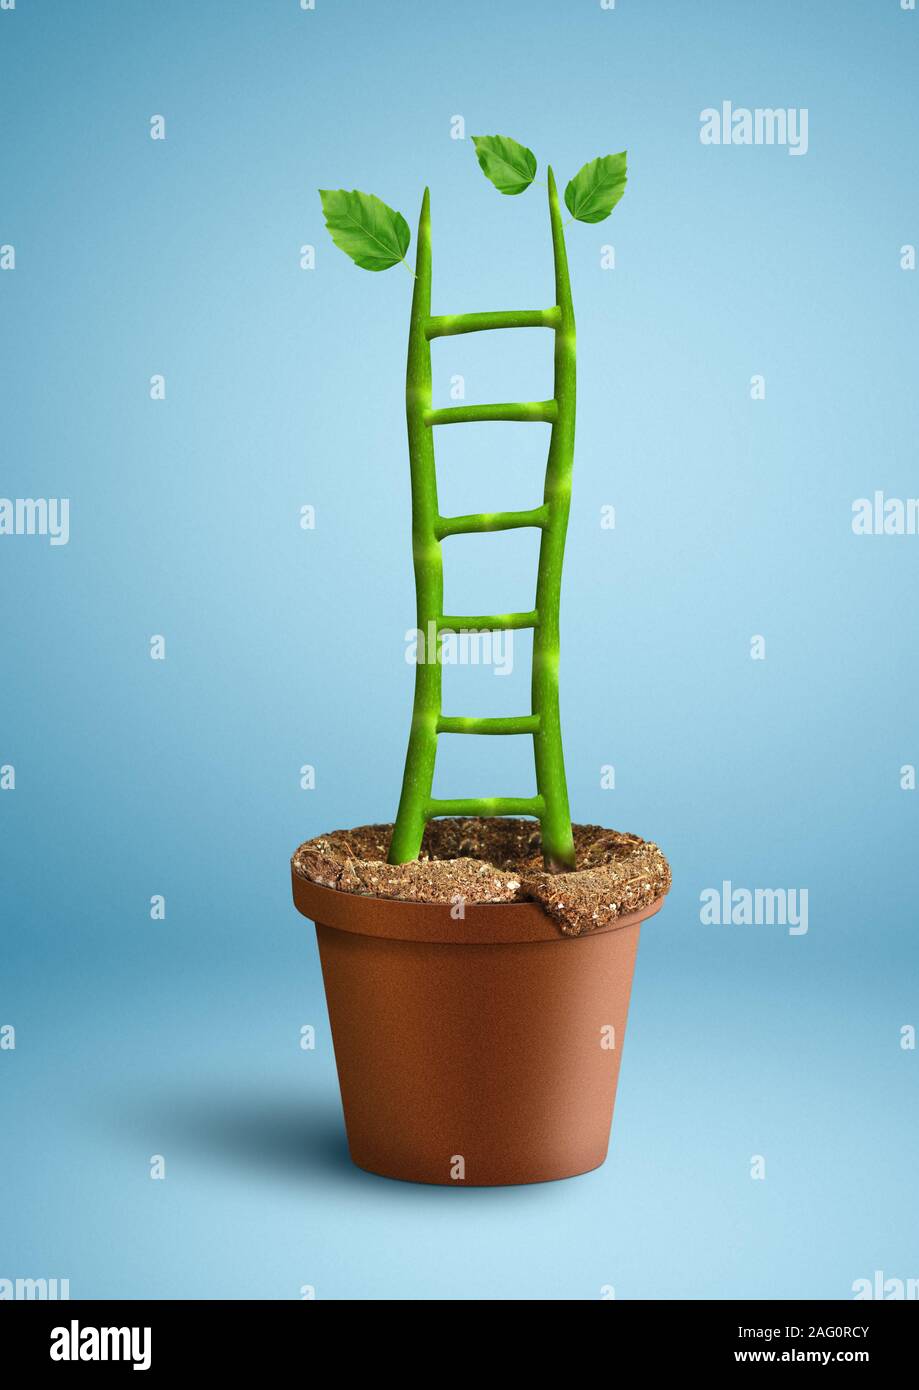 successful growth creative concept, plant as ladder in pot Stock Photo